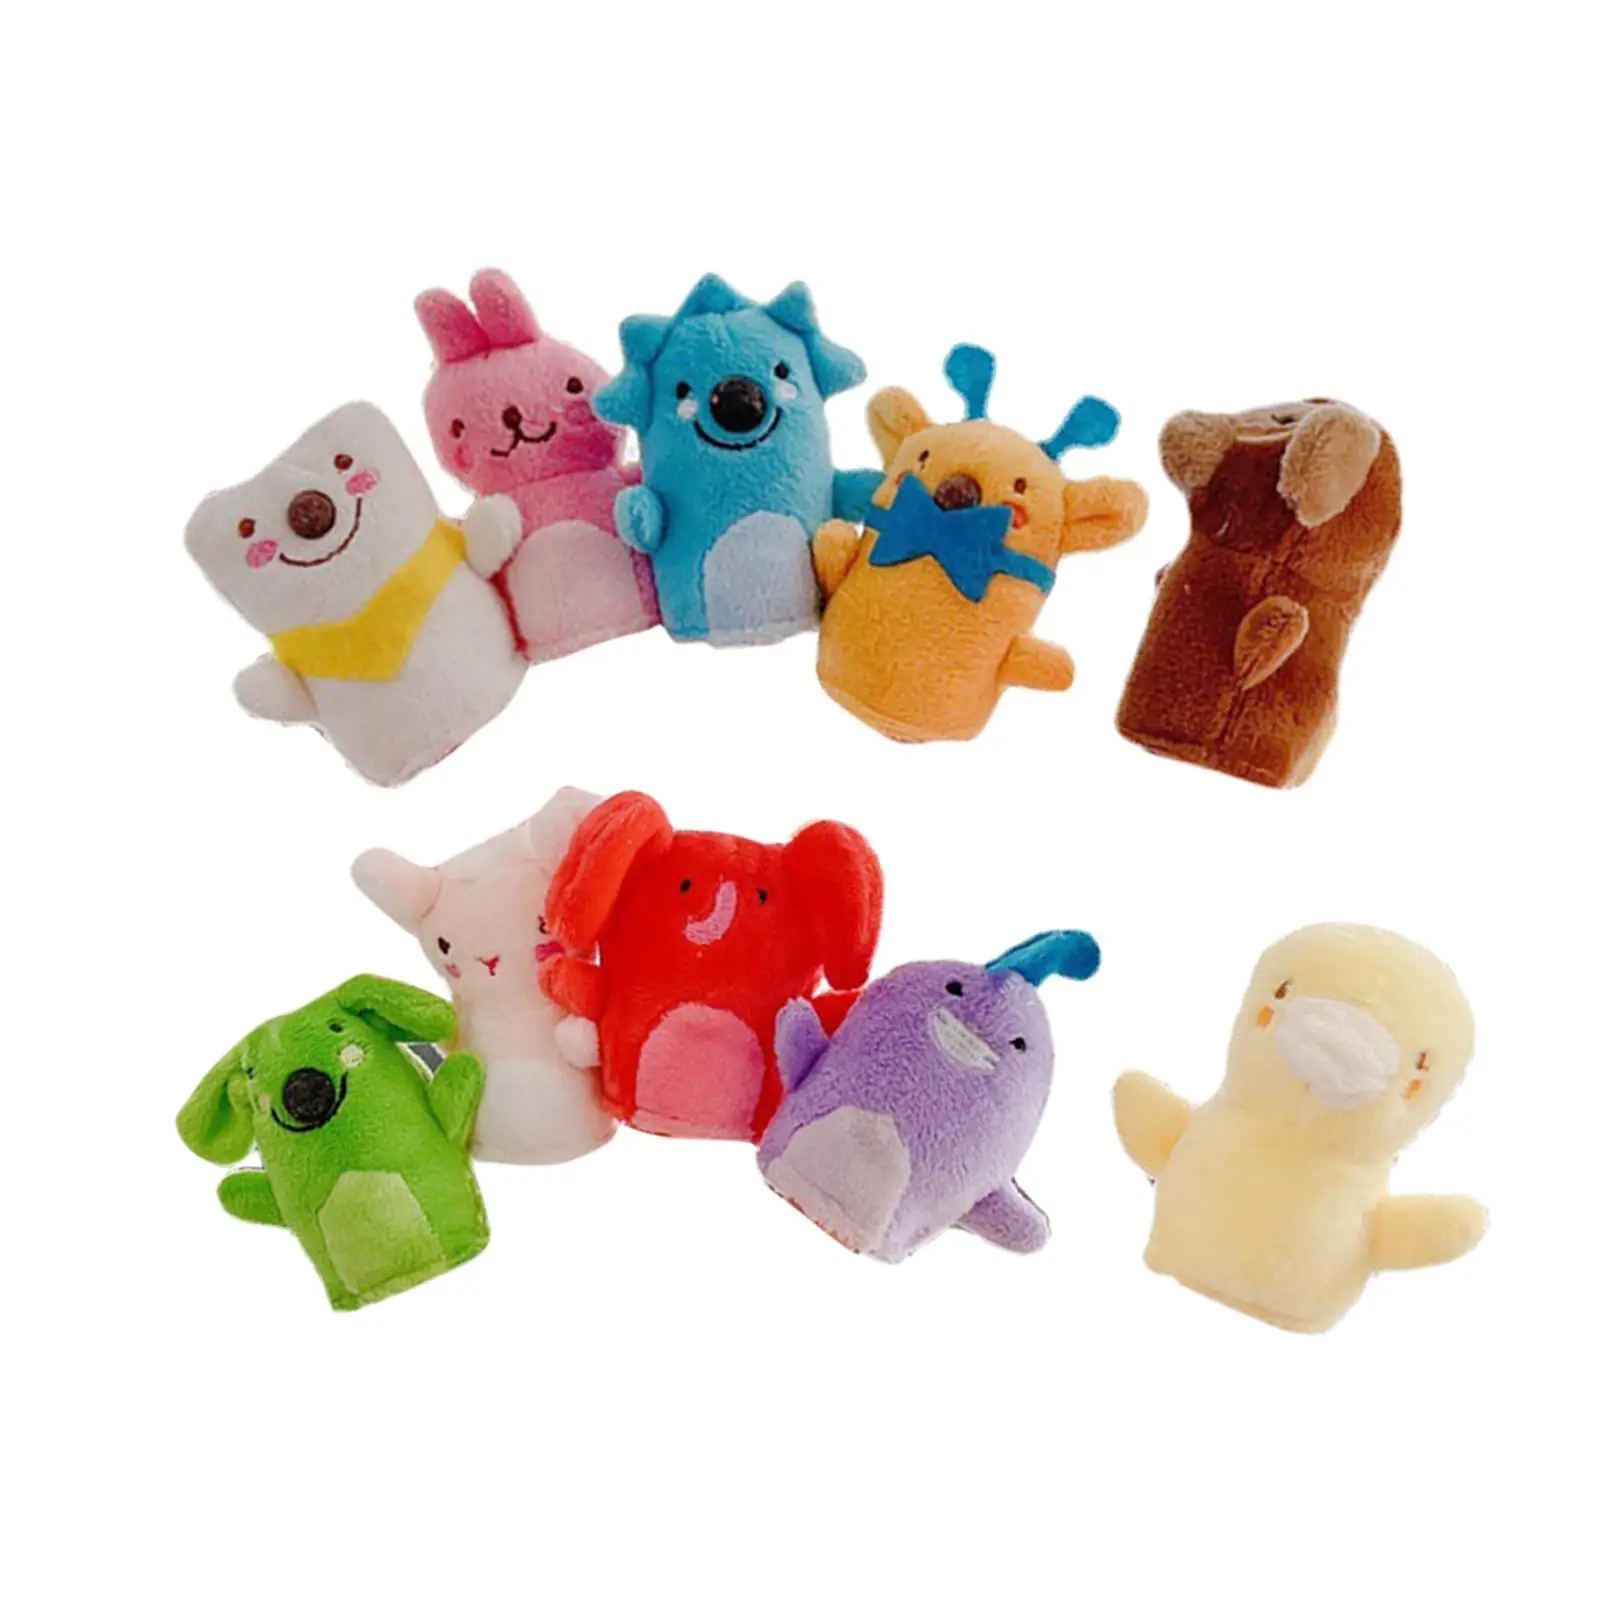 10x Finger Puppet Beach Toys Adorable Novelty Educational for Gifts Toddler